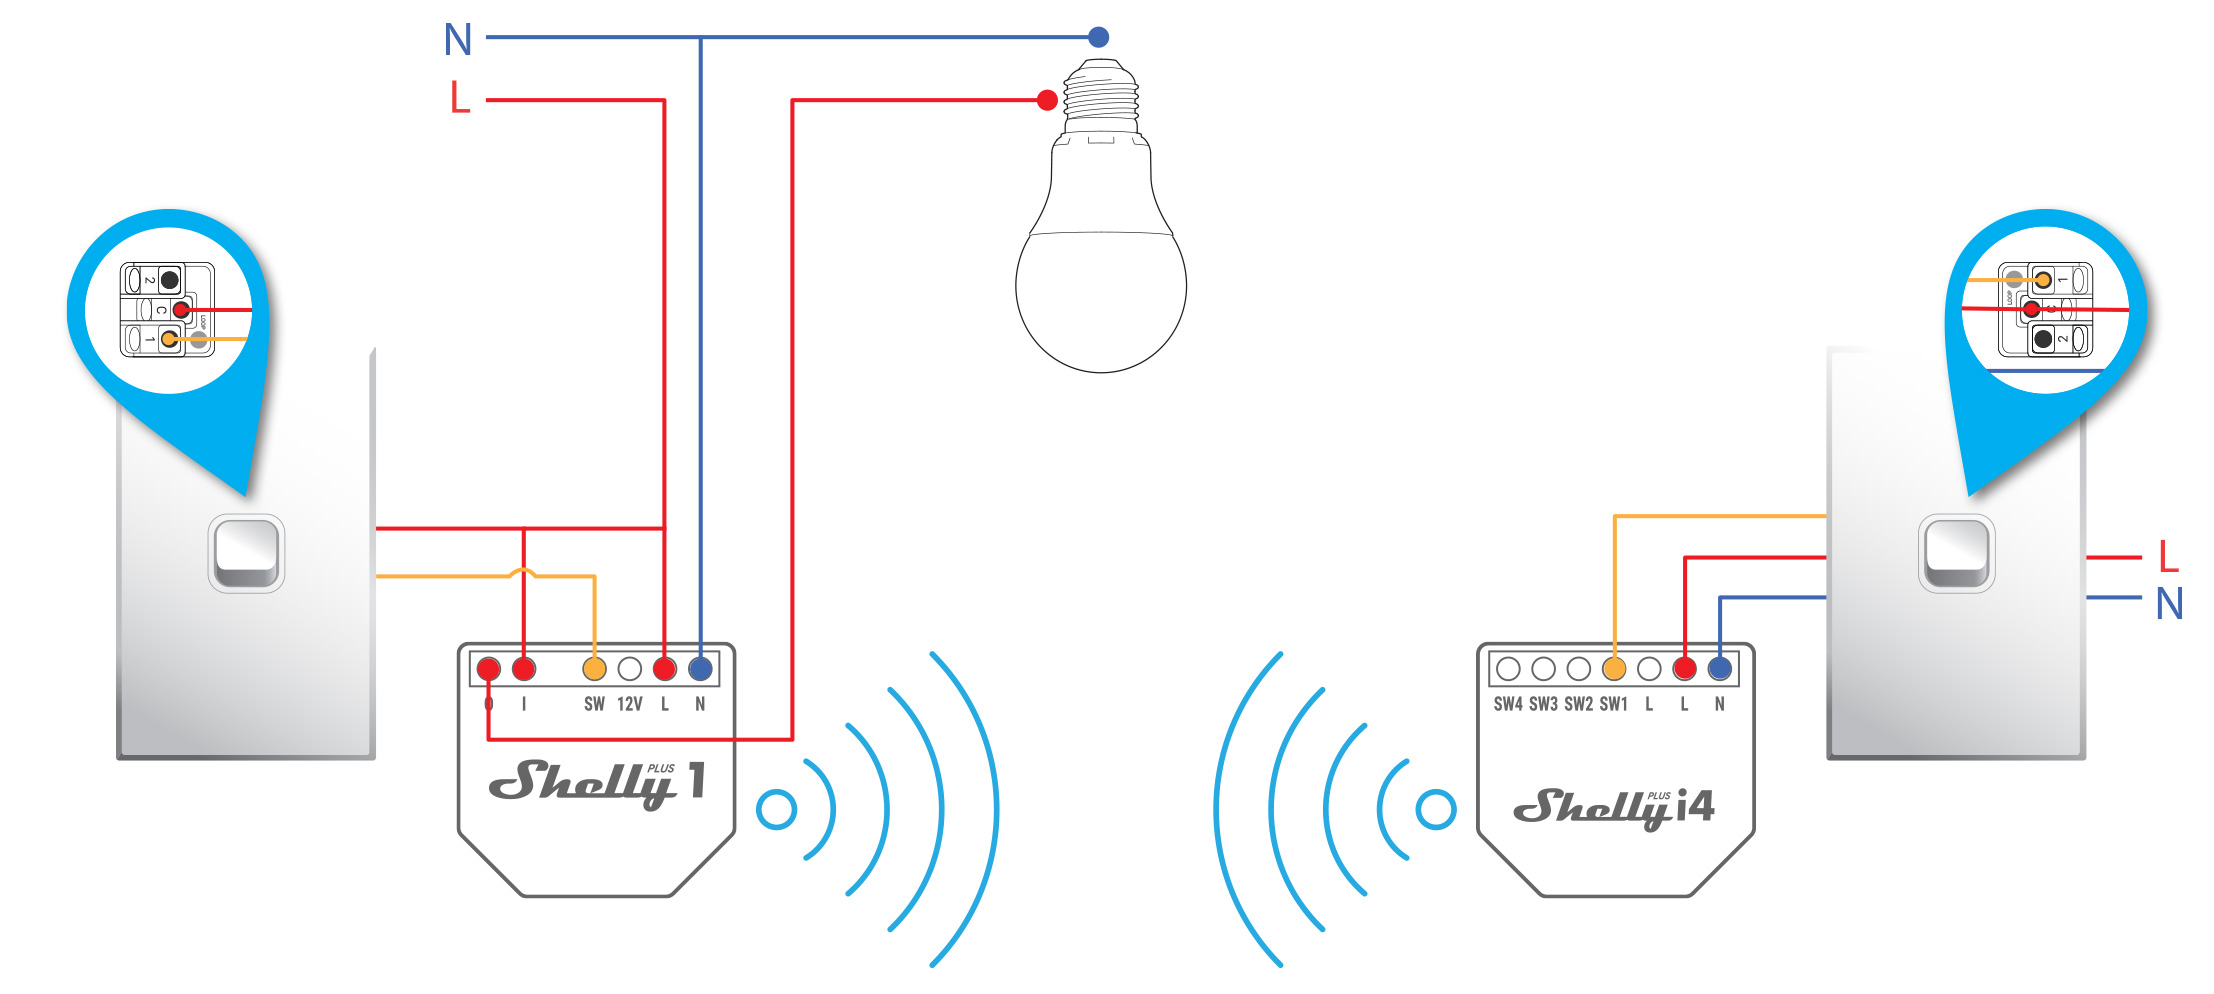 SOLVED] Shelly1 wiring with 2-way switching (hotel switch